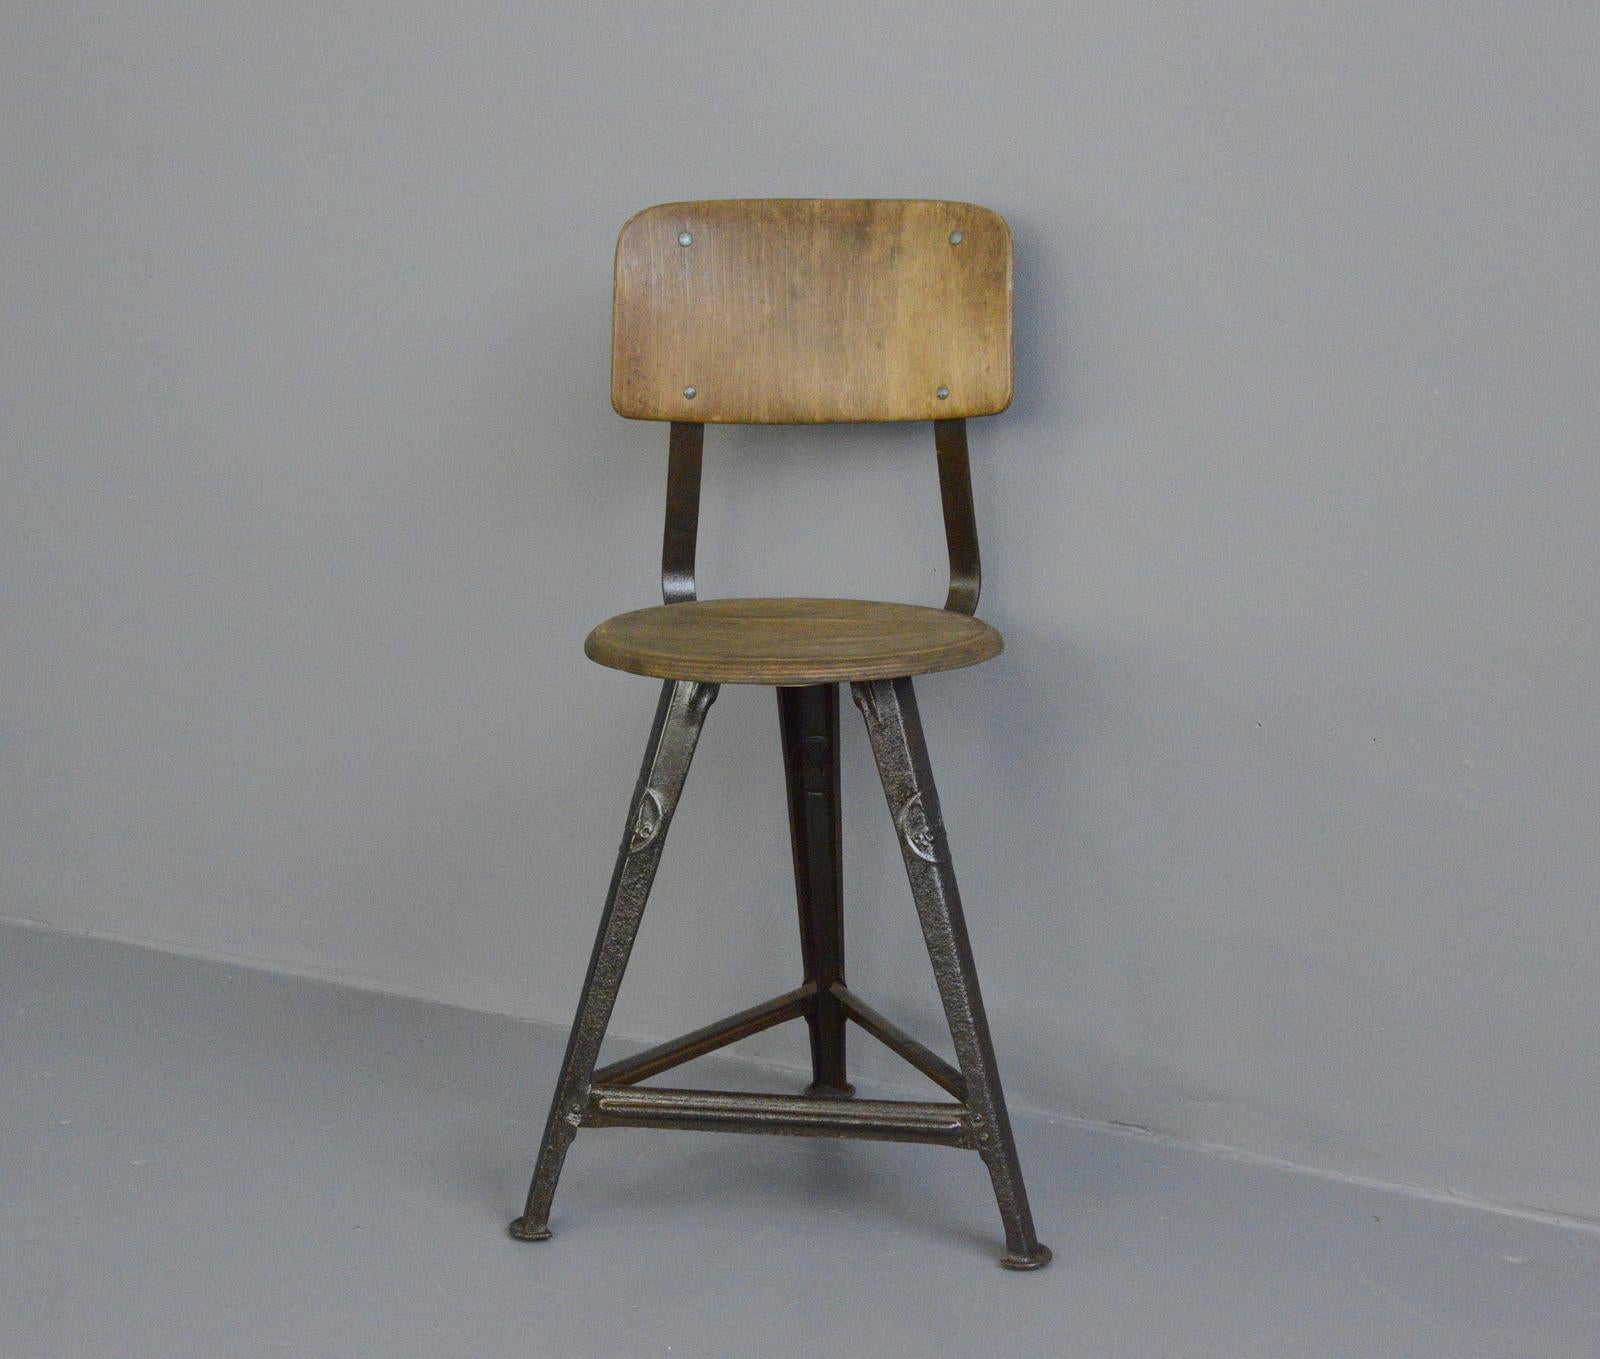 Industrial factory chair by Rowac, circa 1920s

- Steel frame
- Ply seat and backrest
- Relief 